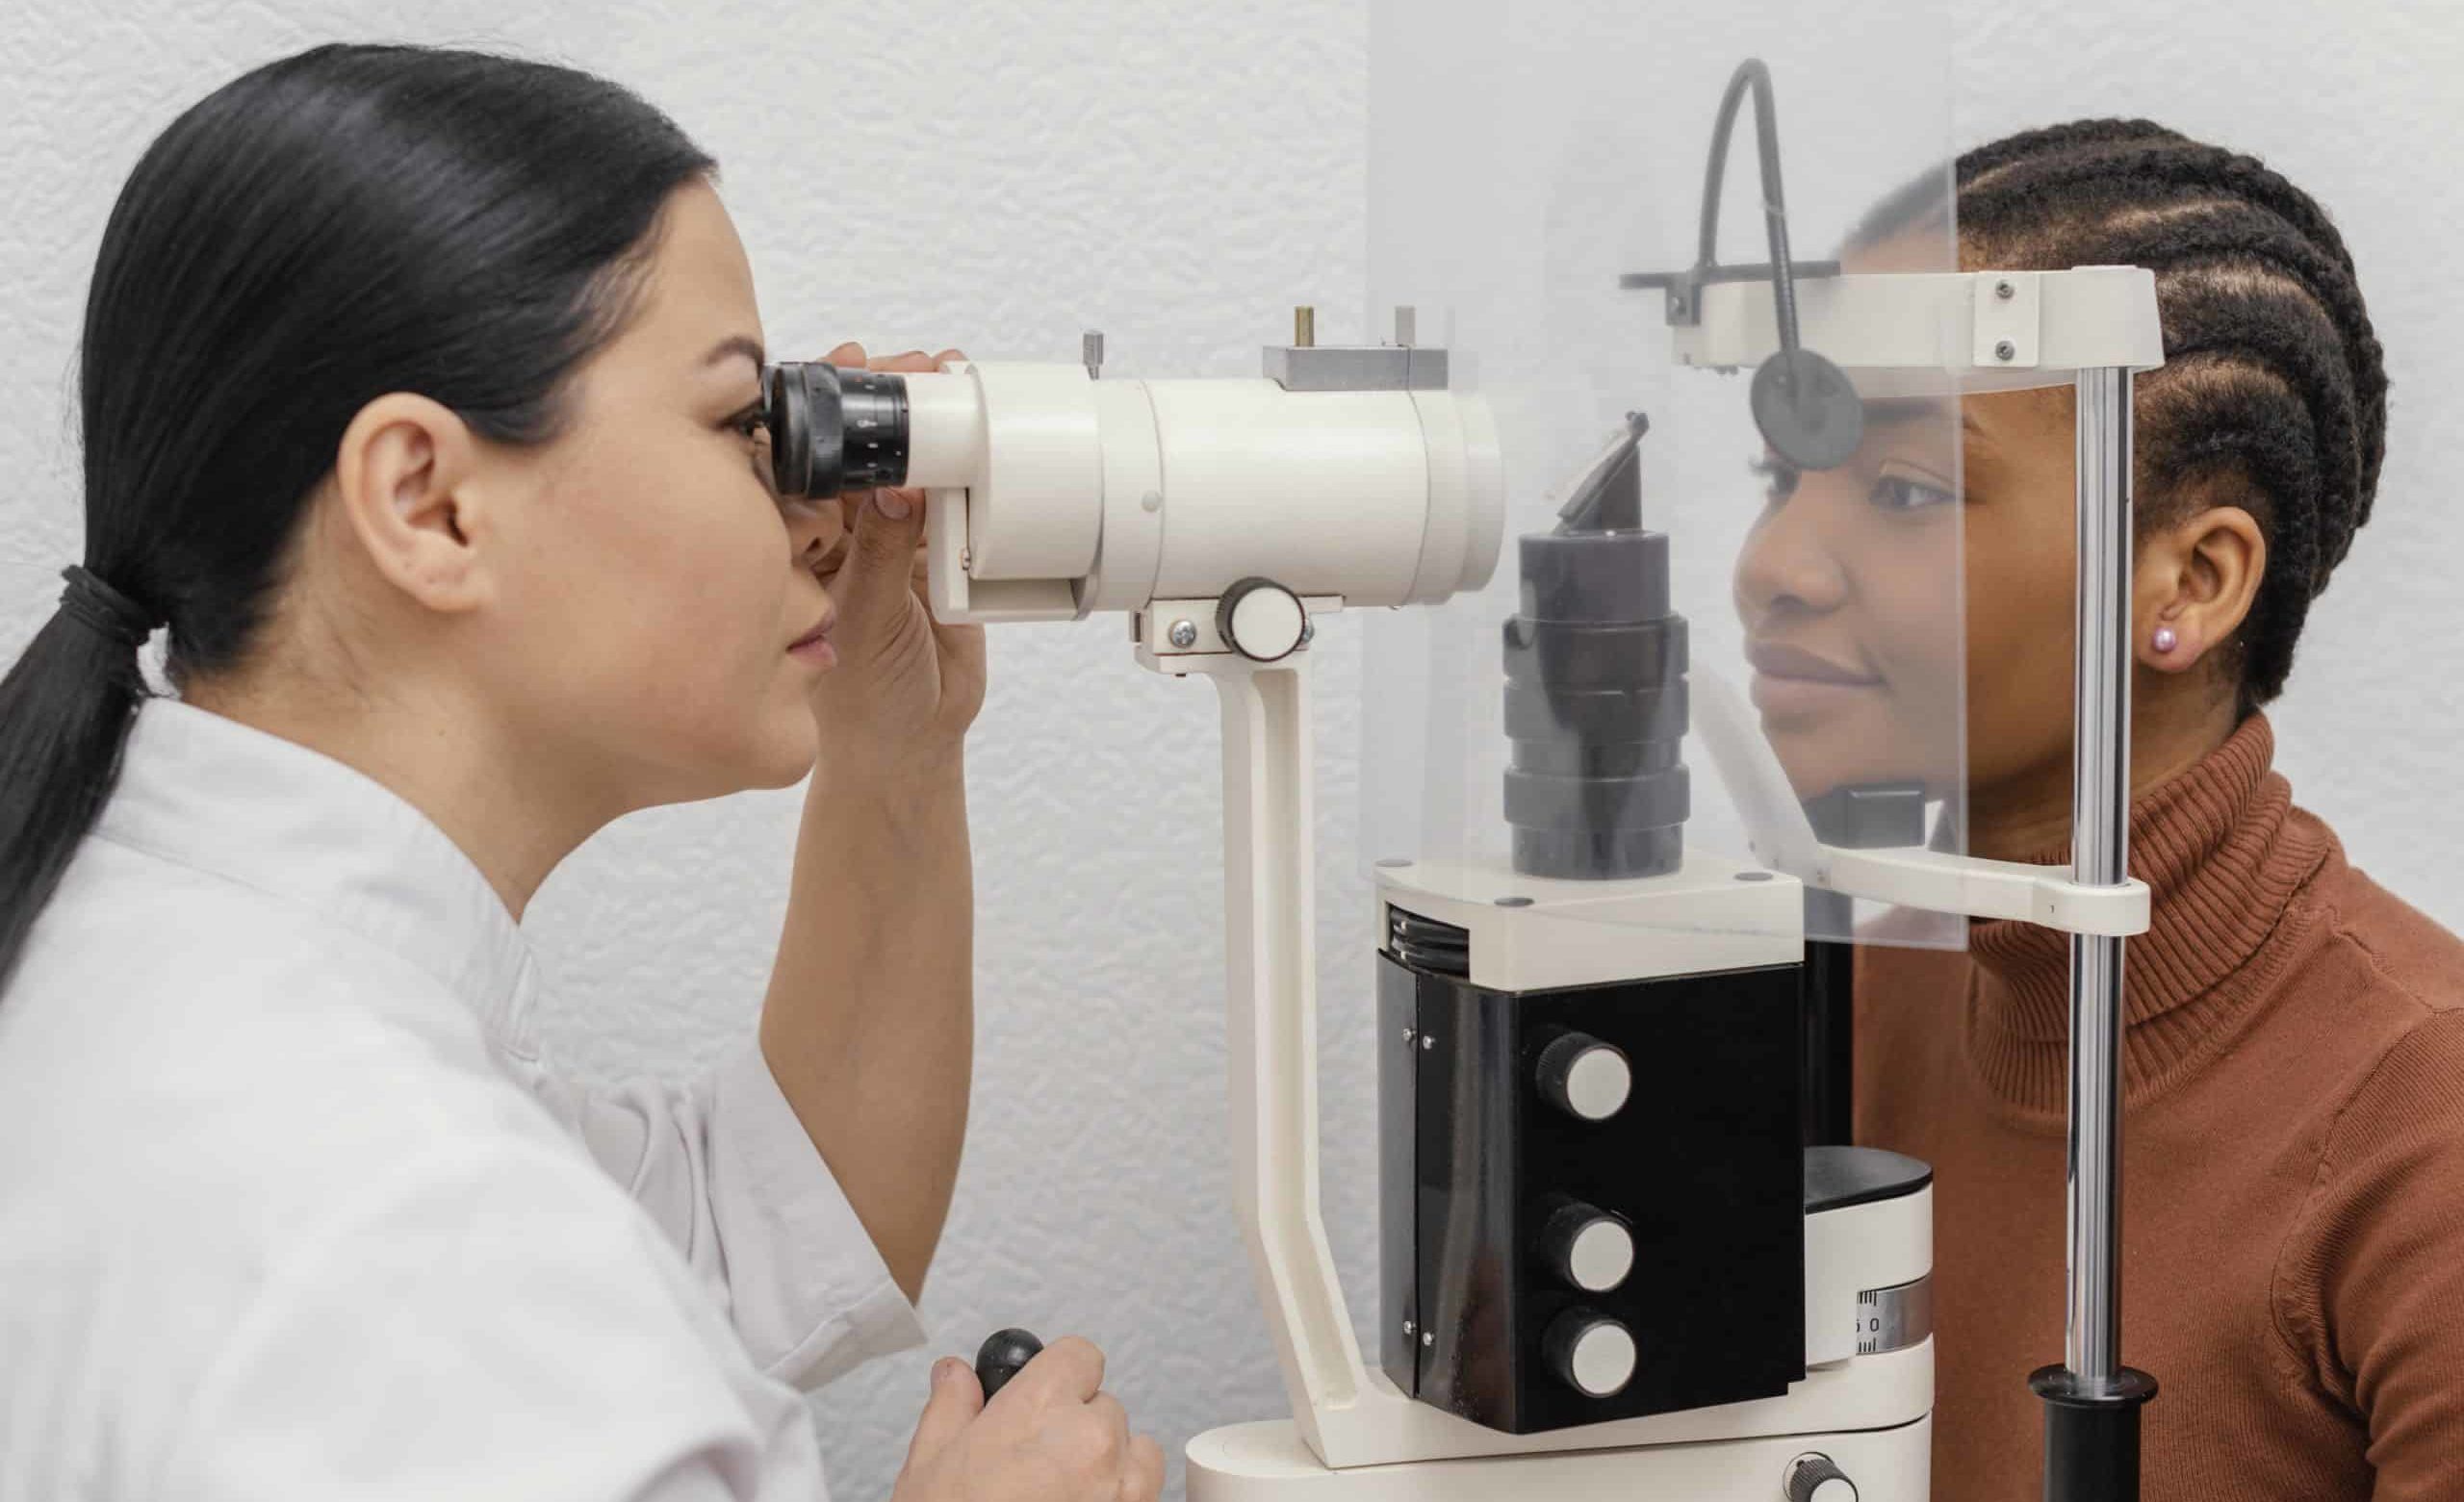 An ophthamologist examines a pediatric patient's eye during an routine eye appointment scheduled on the Complete Eye Care of Medina website.